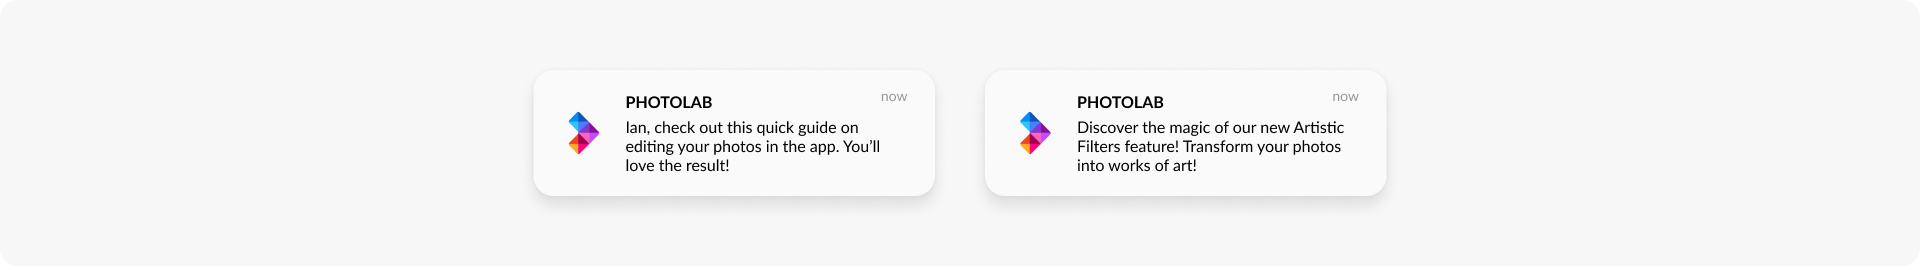 Push notifications for feature discovery